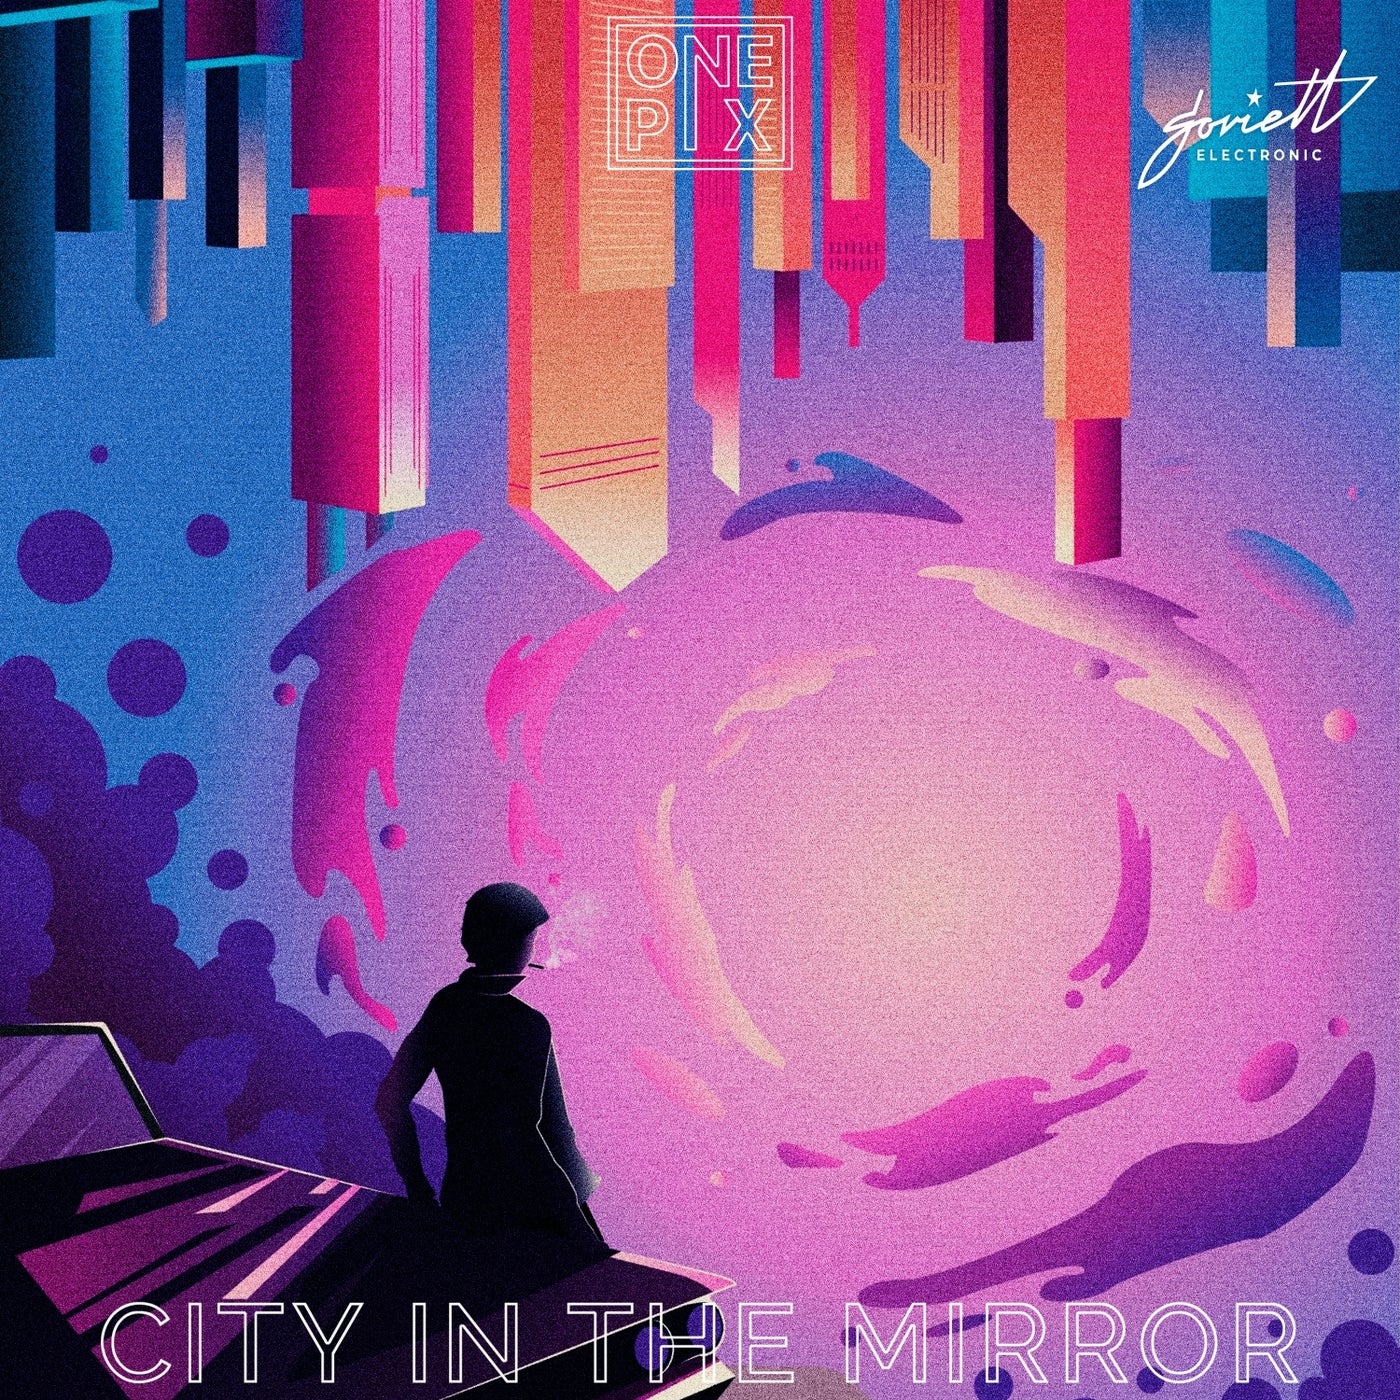 City in the Mirror